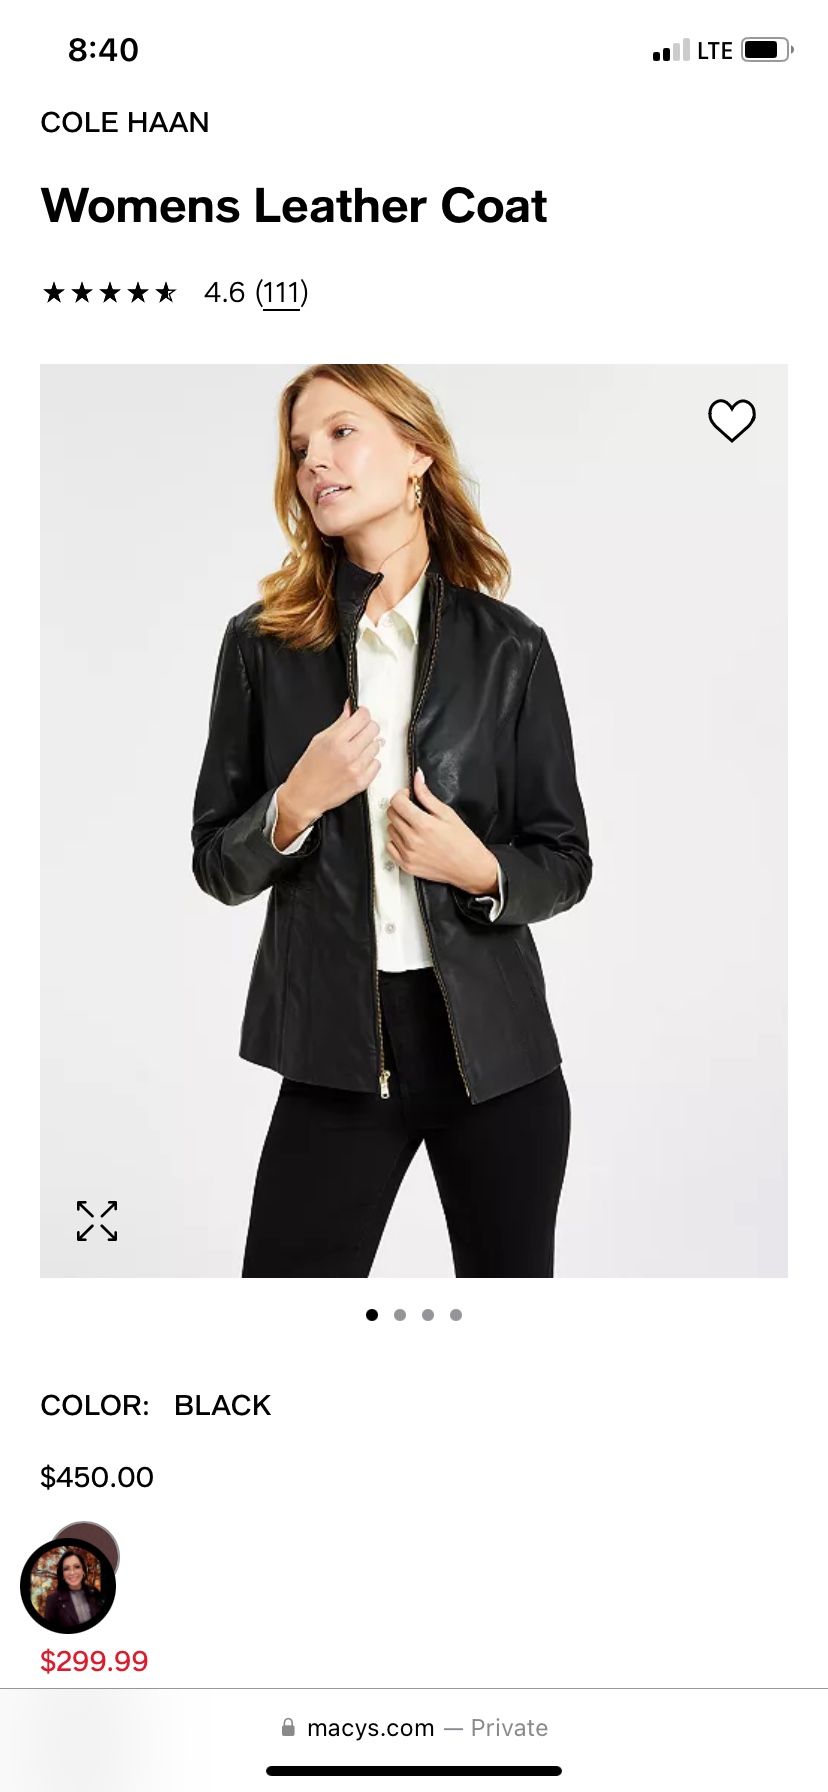 COLE HAAN Womens Leather Coat